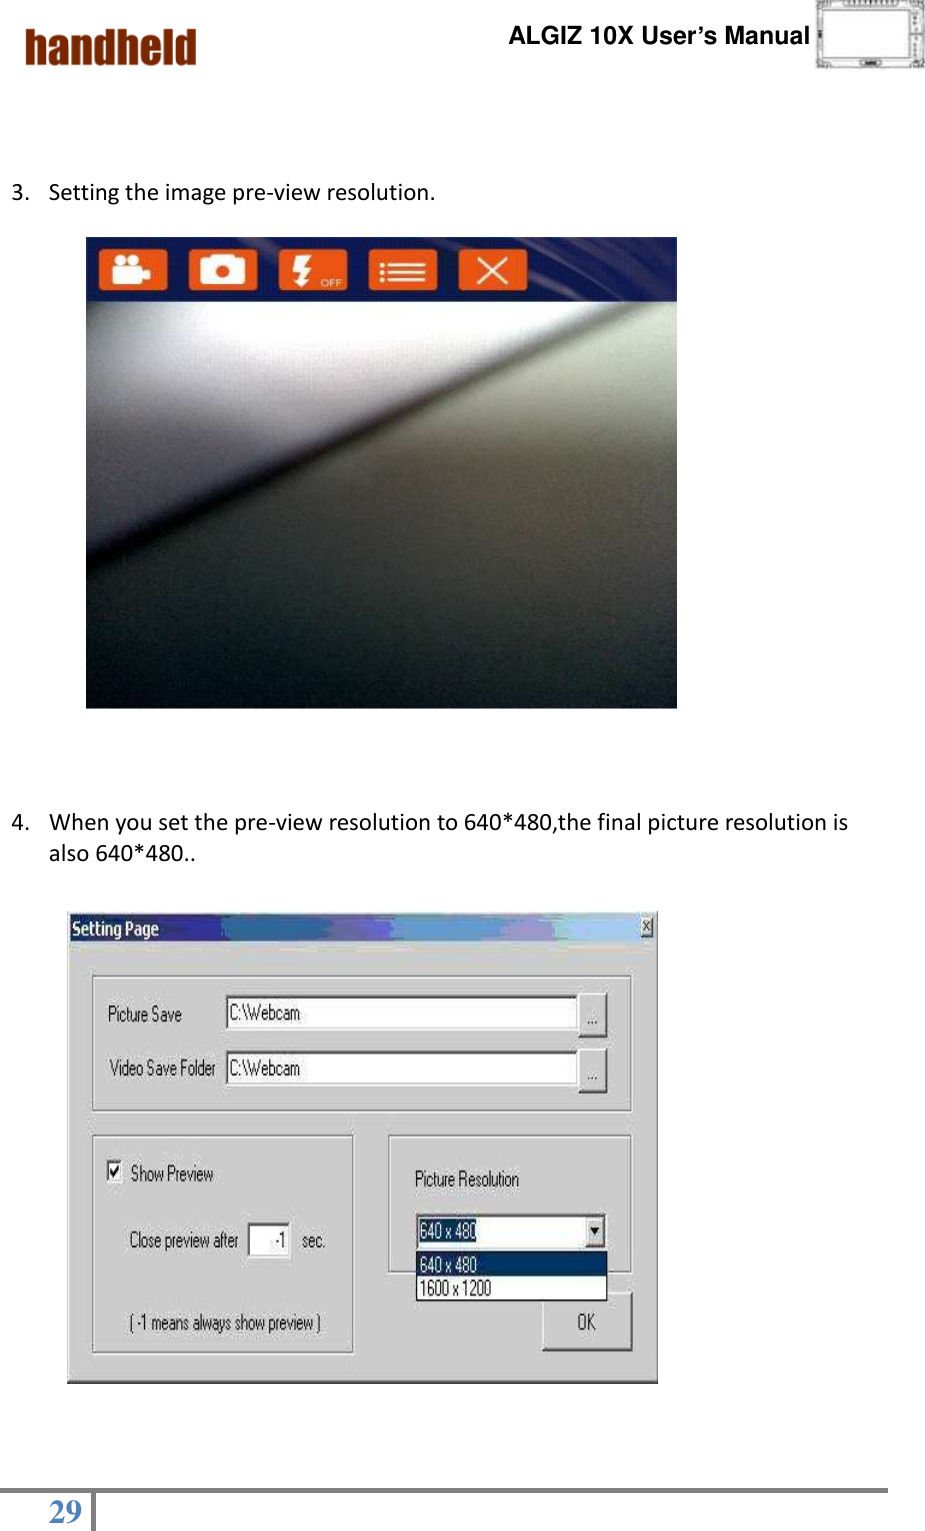      ALGIZ 10X User’s Manual  29     3. Setting the image pre-view resolution.       4. When you set the pre-view resolution to 640*480,the final picture resolution is also 640*480..                                   